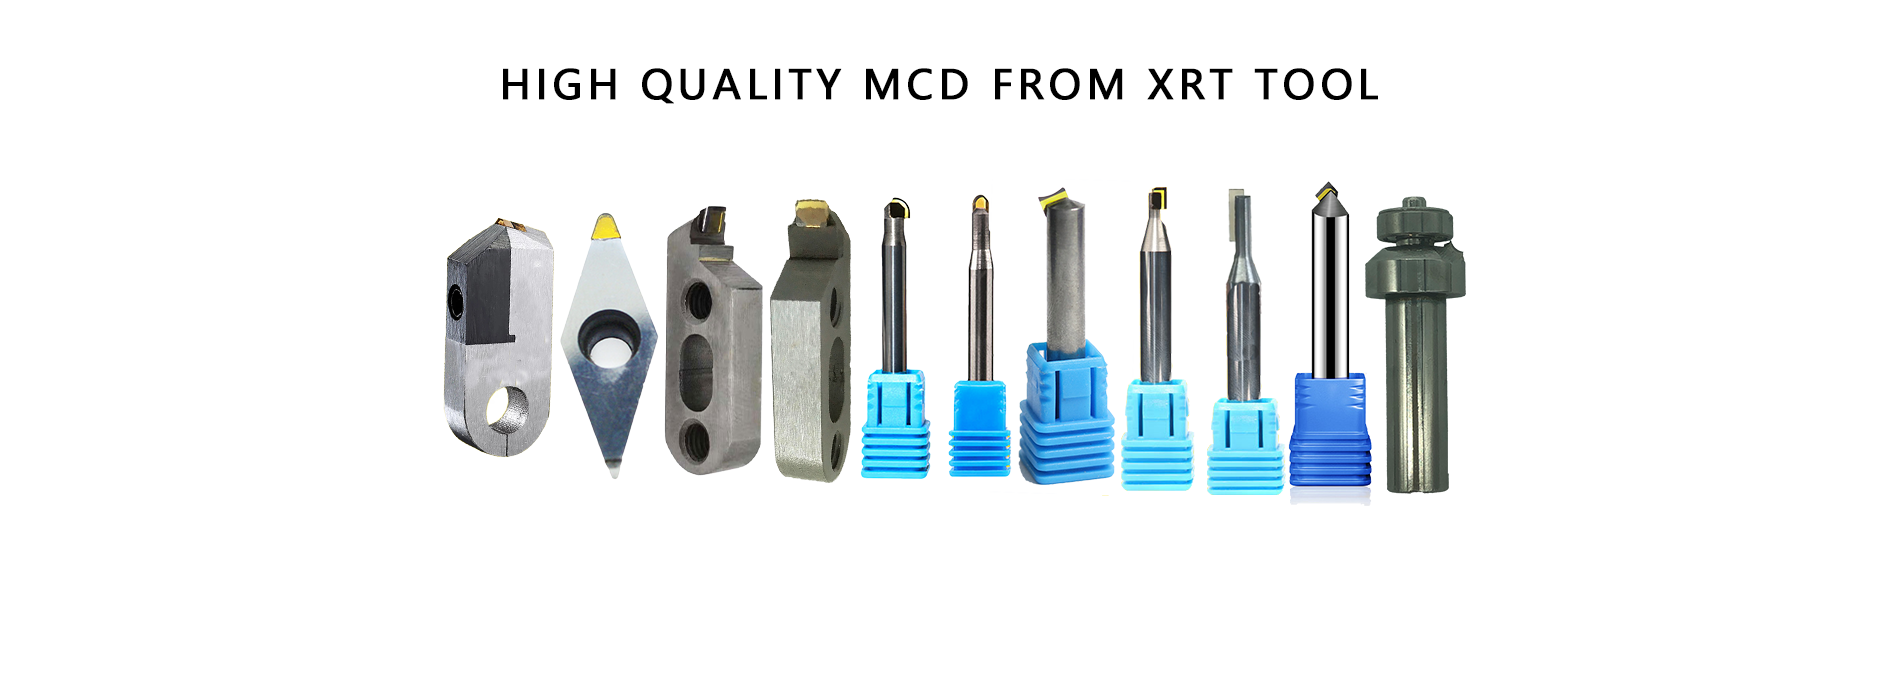 High quality MCD from XRT Tool banner